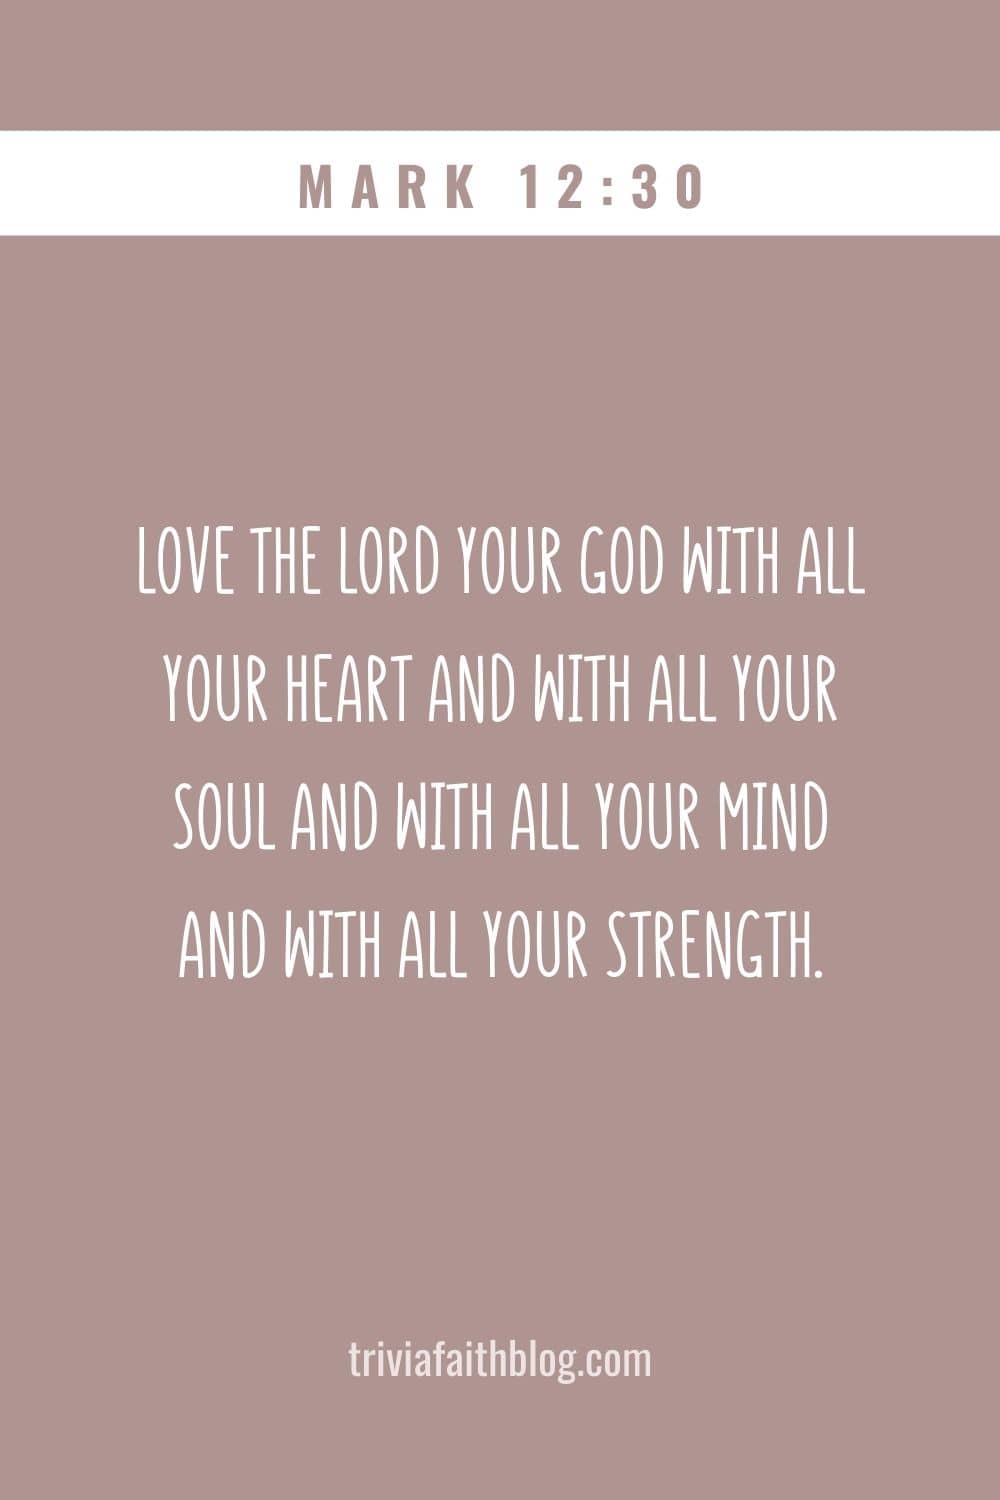 Love the Lord your God with all your heart and with all your soul and with all your mind and with all your strength